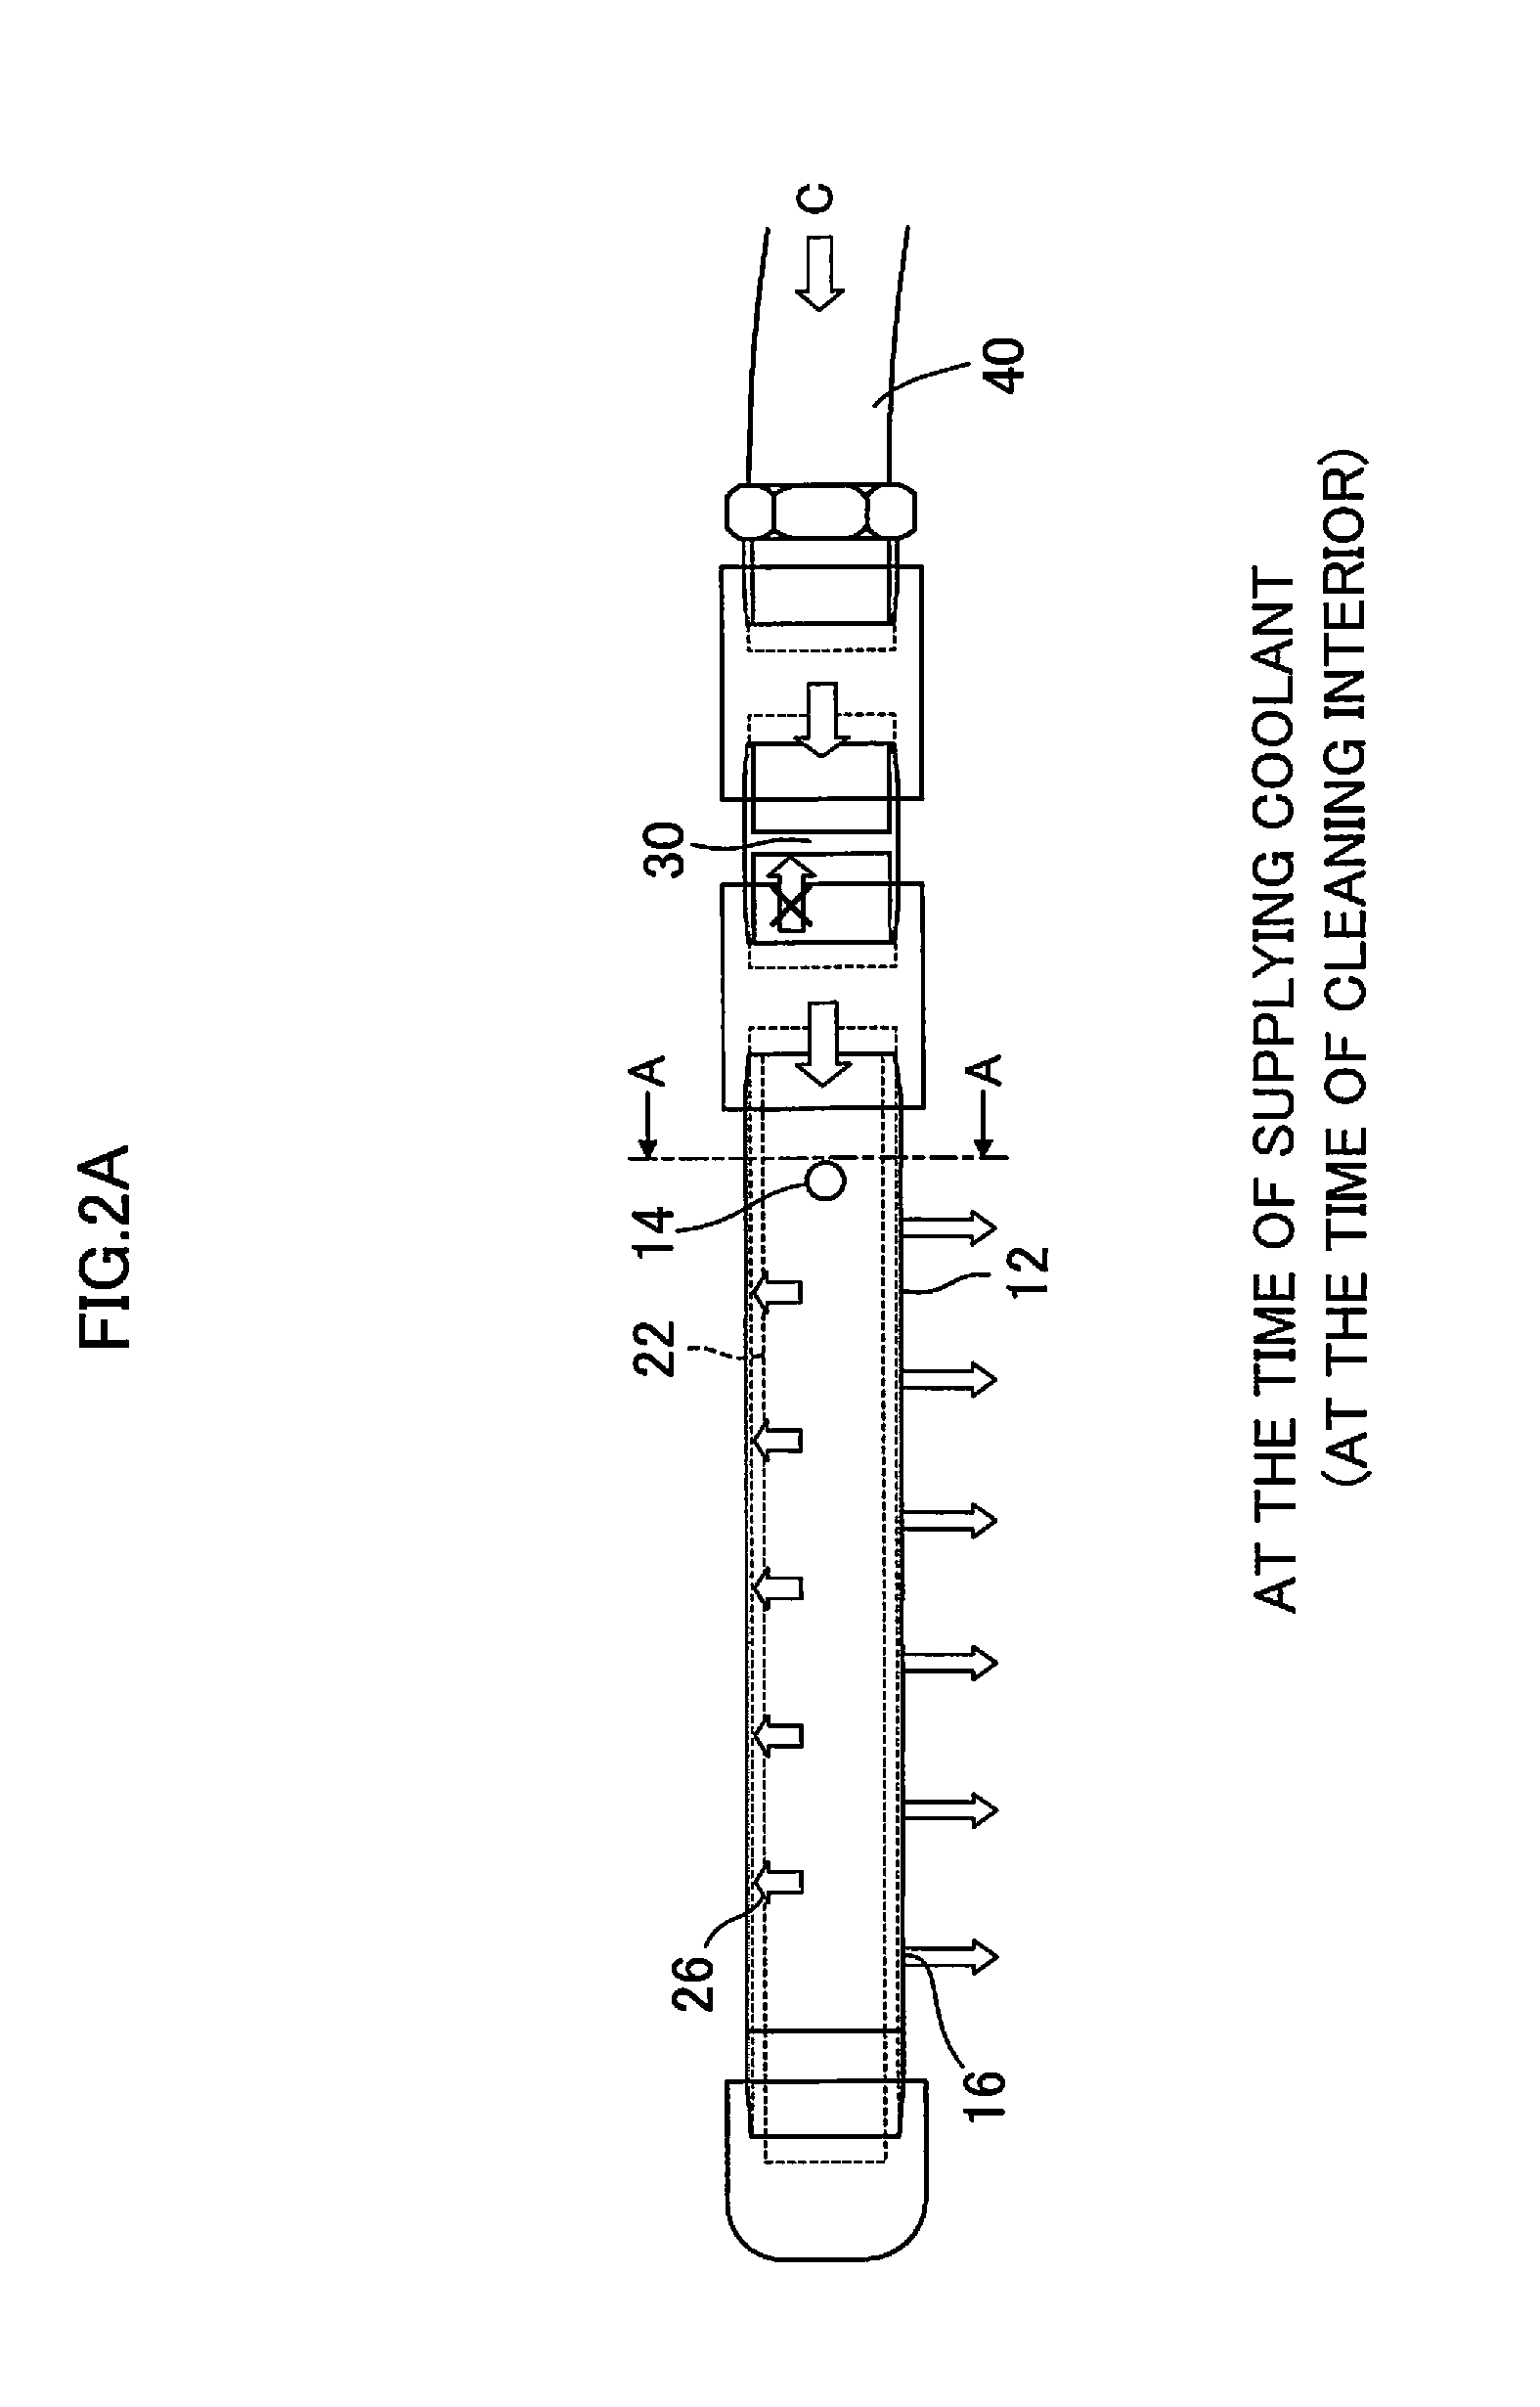 Interior cleaning device for machine tool, and cleaning pipe used by interior cleaning device for machine tool